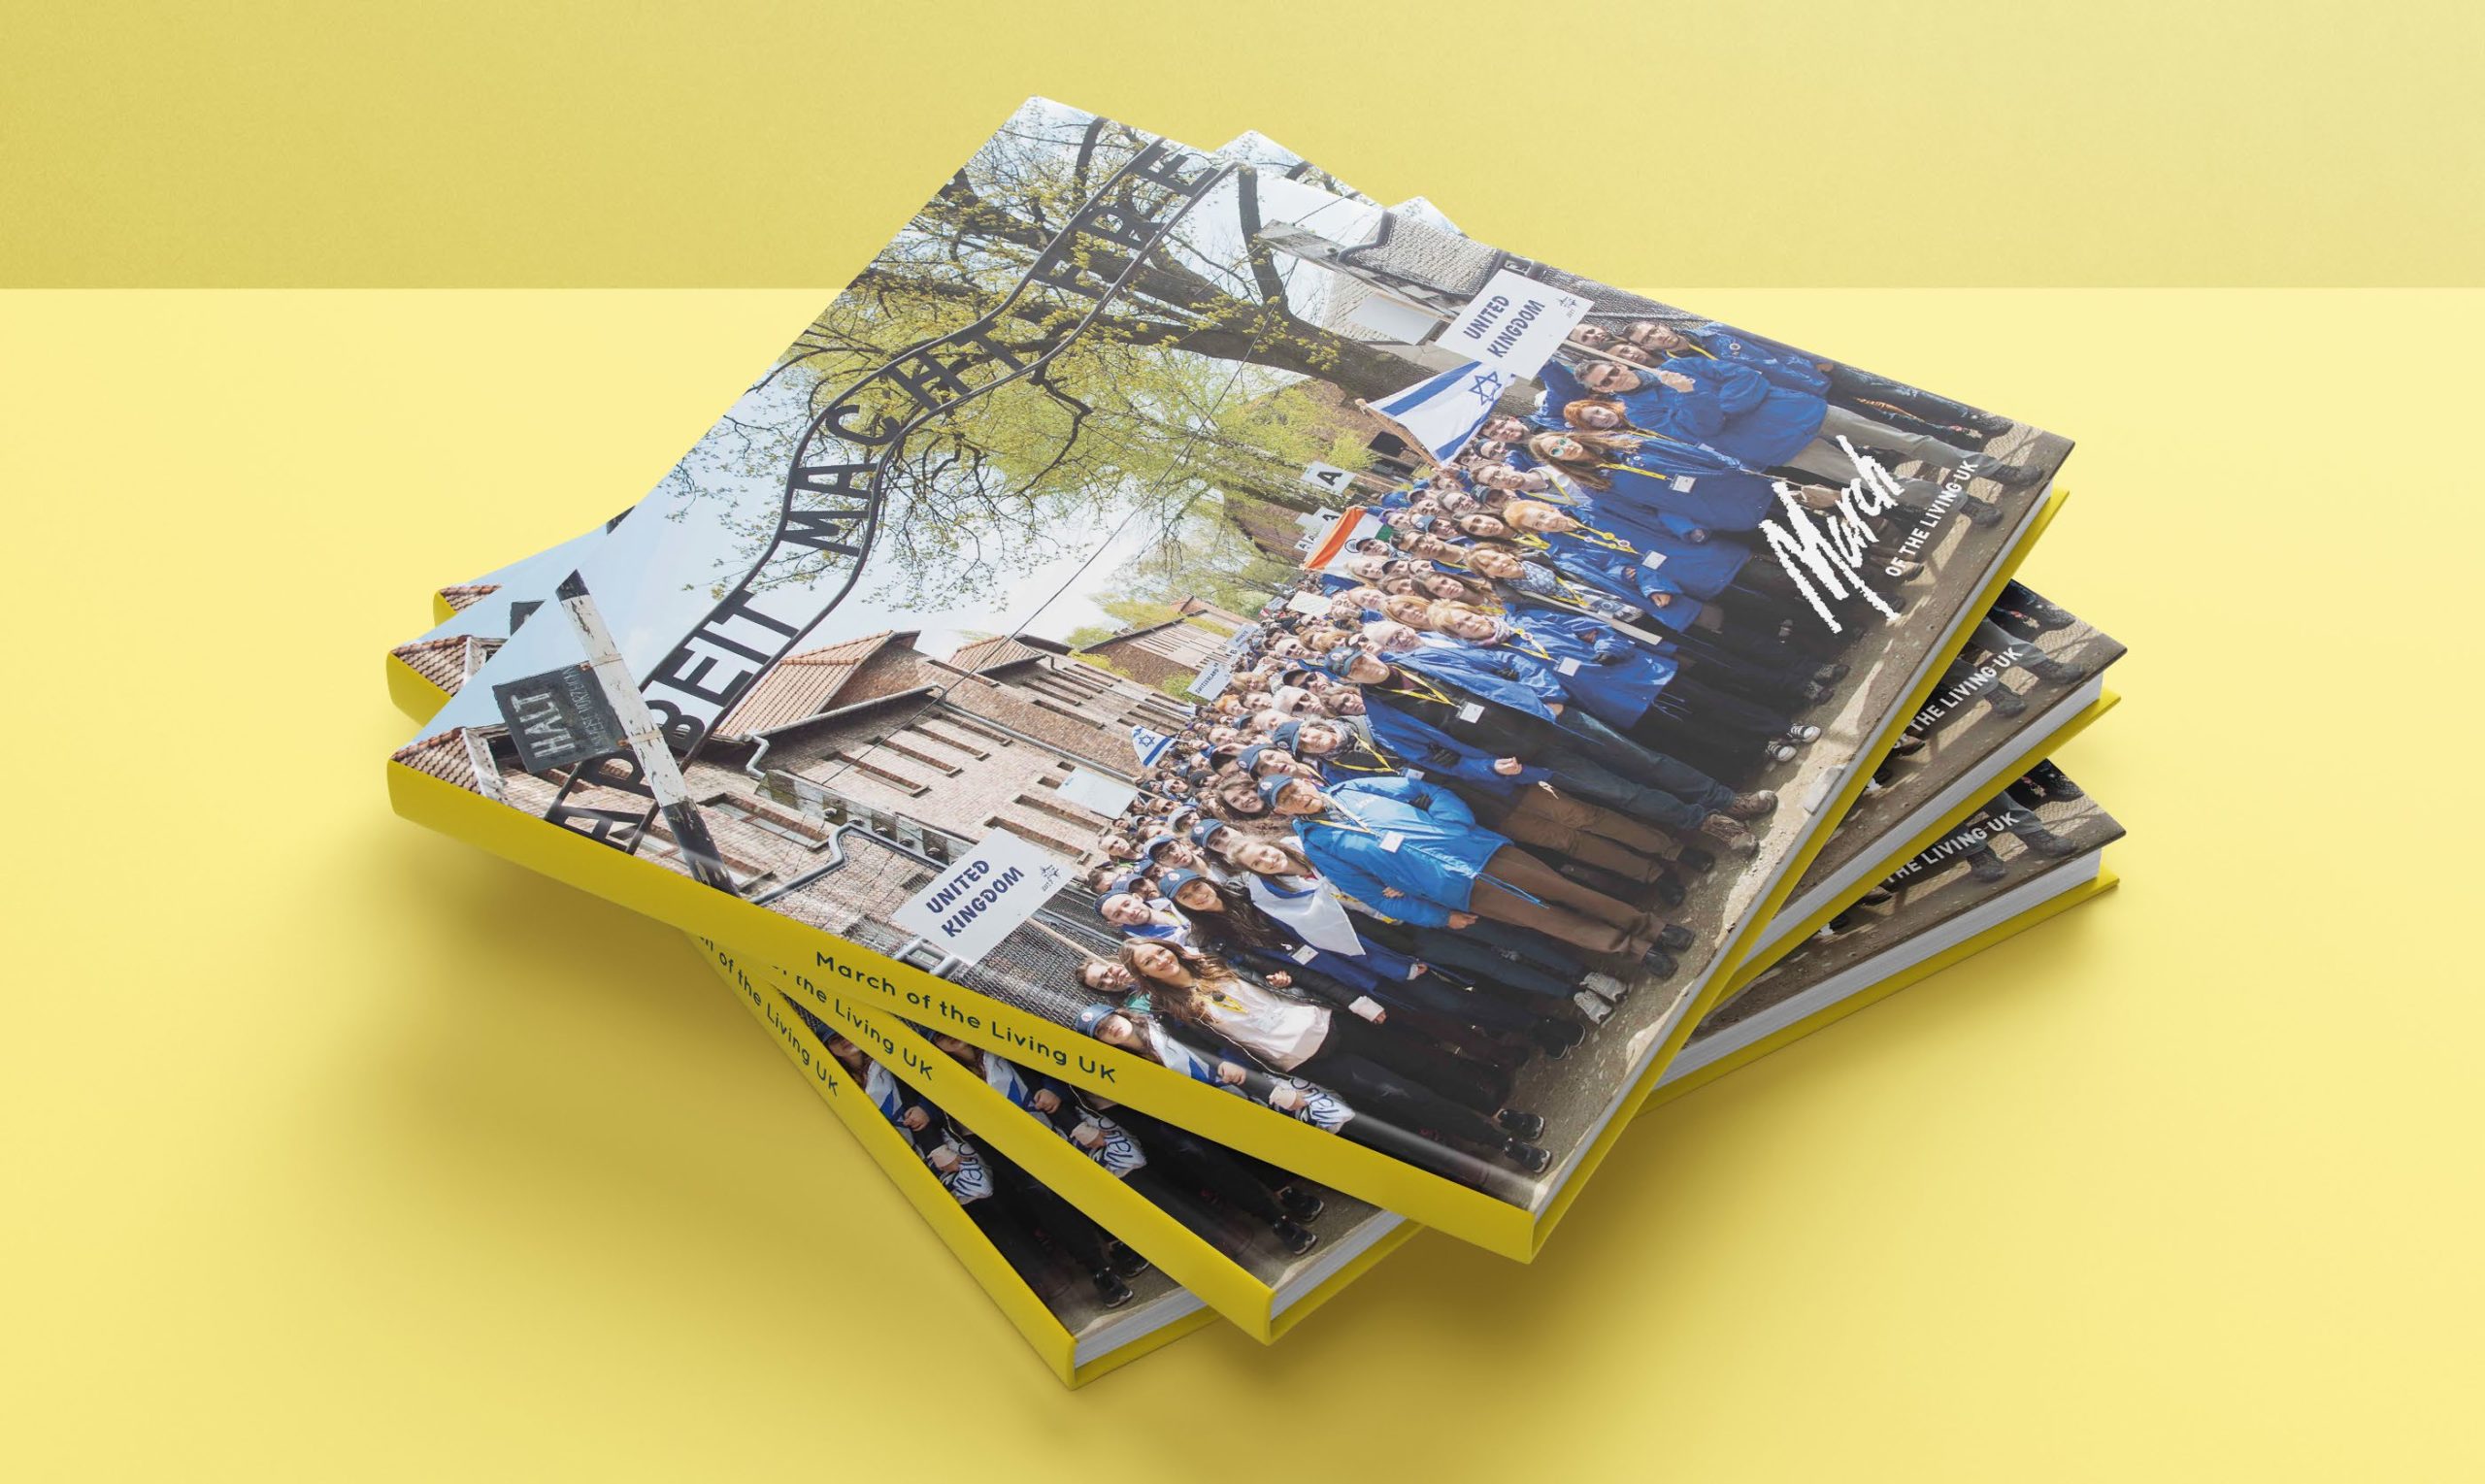 Photobook design and layout - Graphic Design by Zoe Moncaster at ZoeByDesign